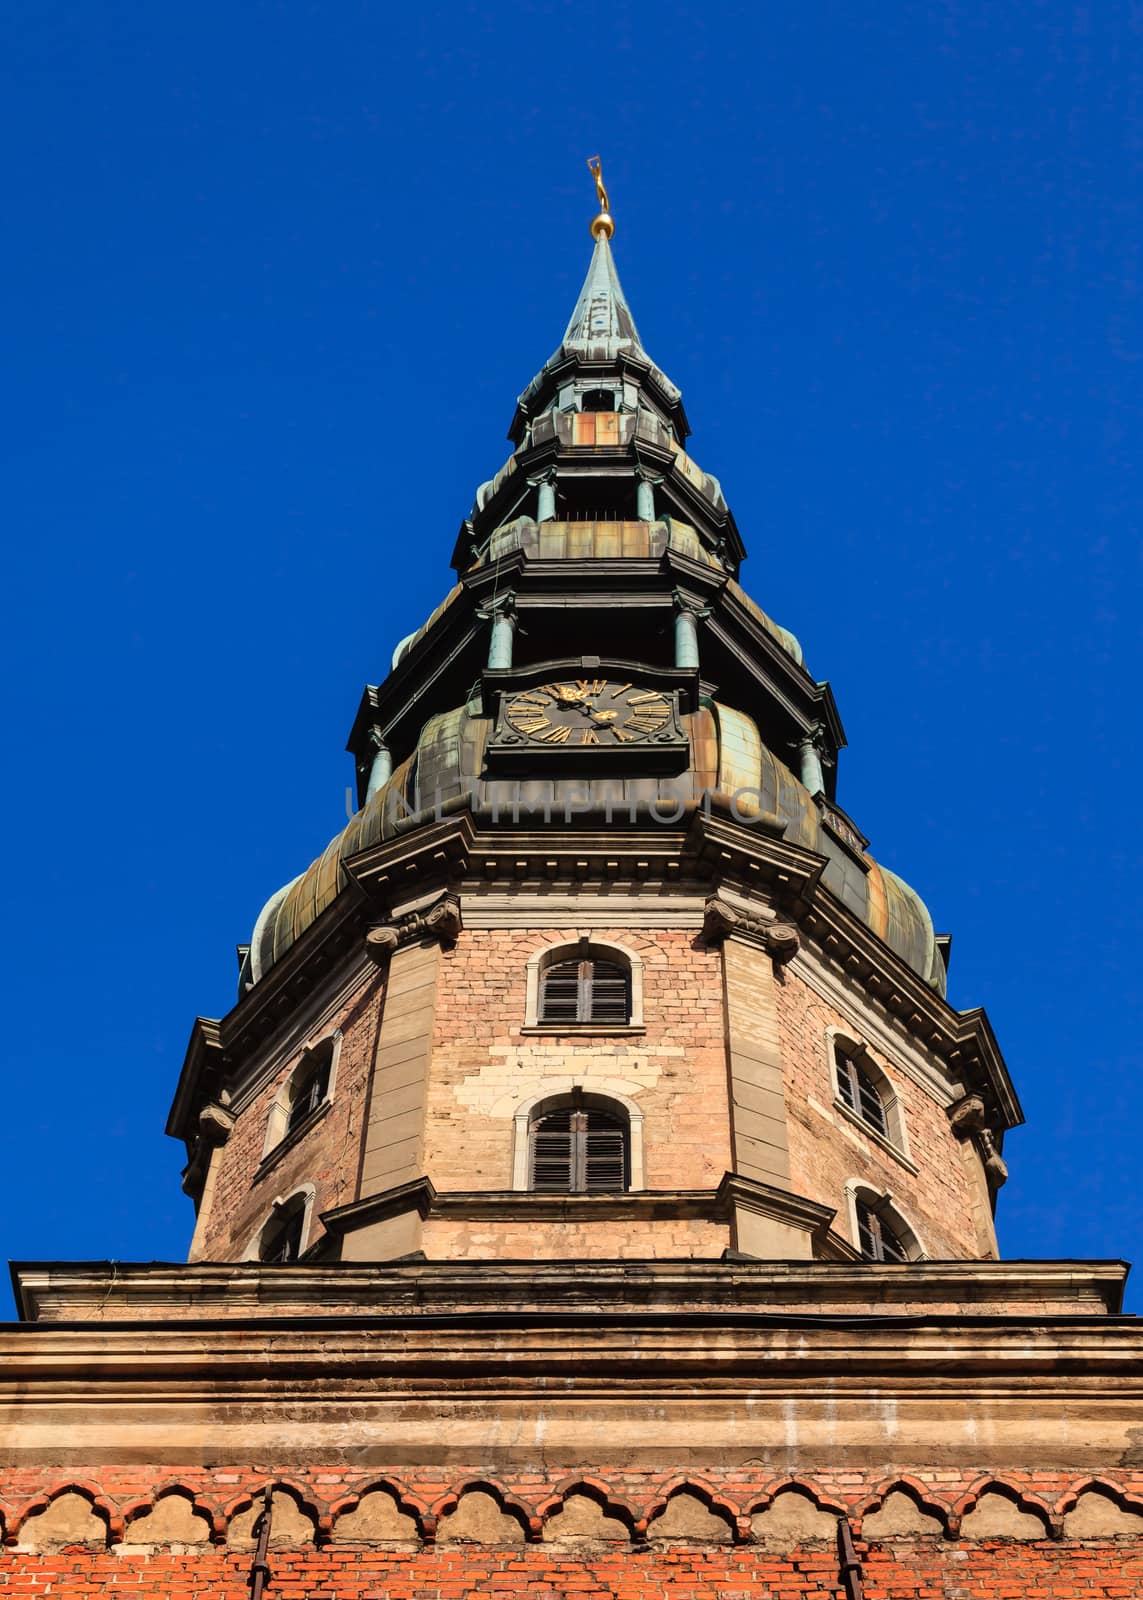 St Peter's Church in Riga, Latvia was first built in 1209 from timber and was later rebuilt in stone.  In 1997 it was included as a UNESCO world heritage site.